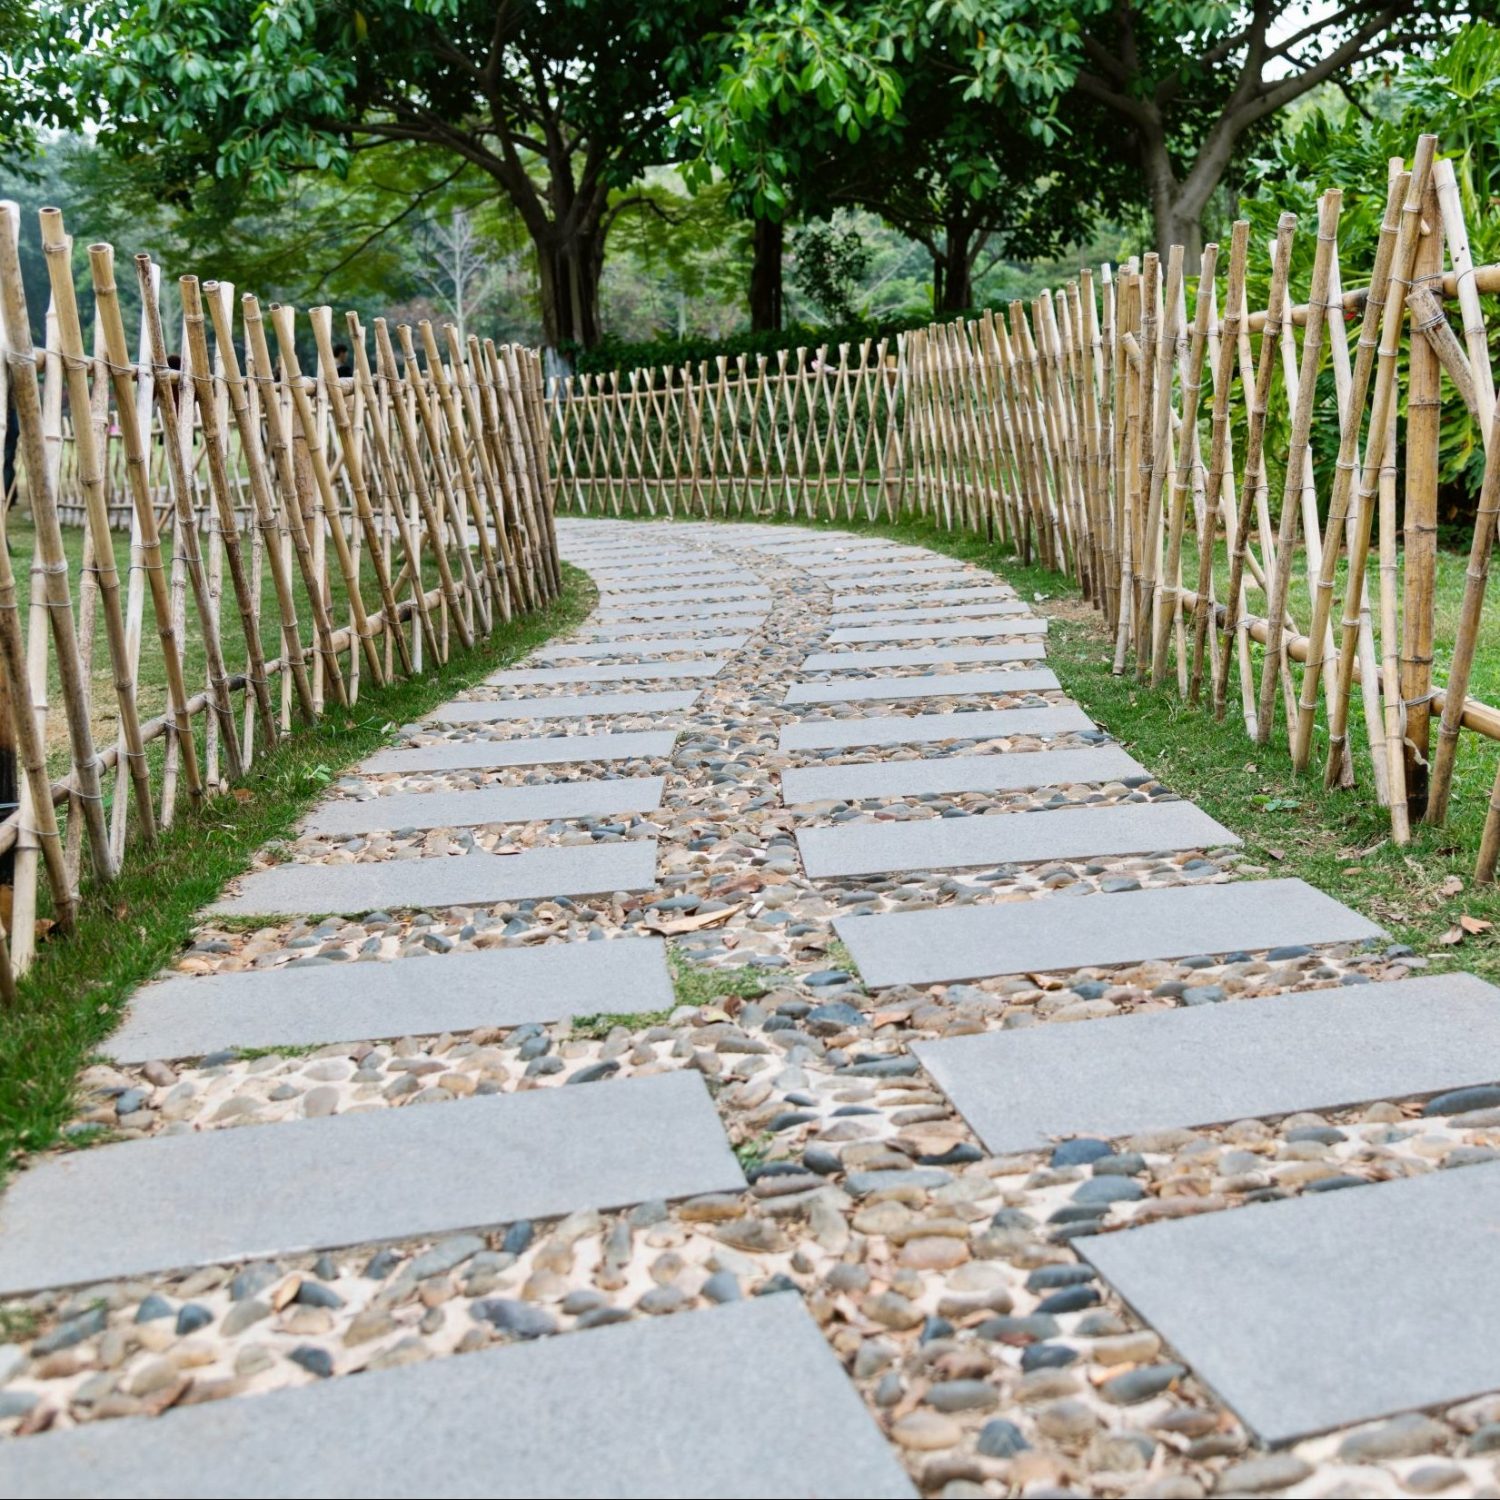 fenced path in a garden guides users to a destination like targeted marketing does